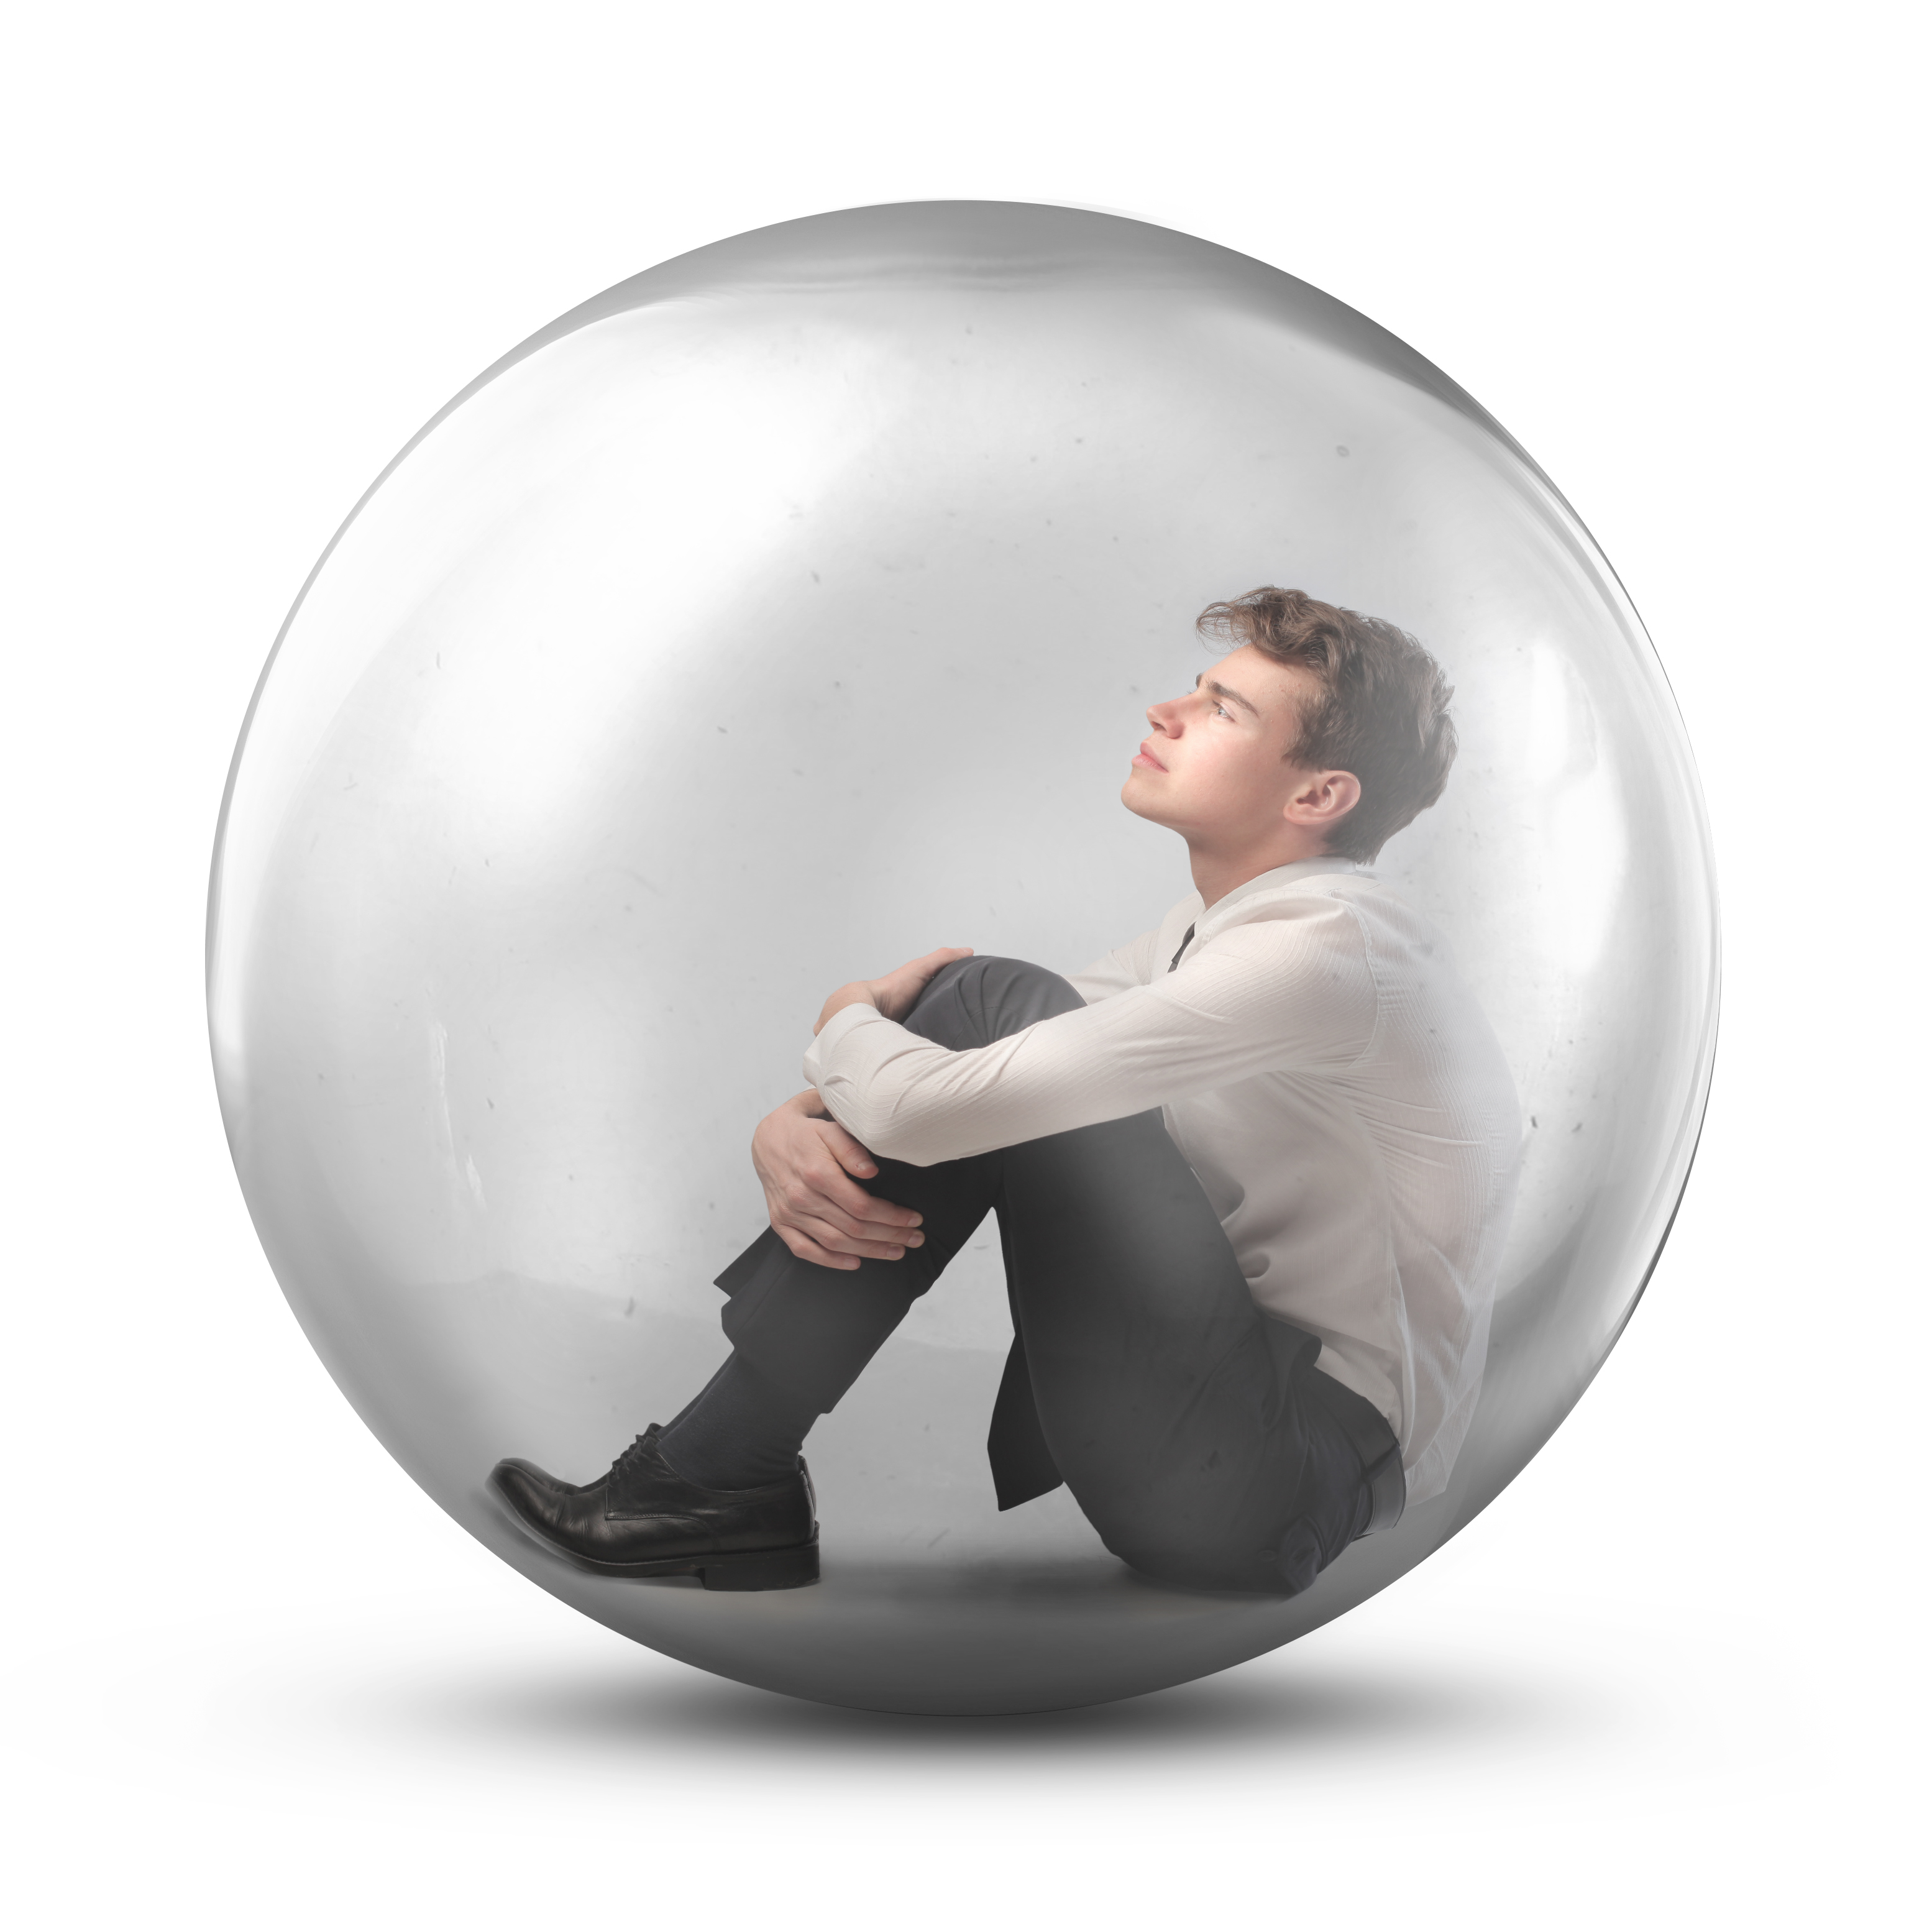 Protective bubble – Future Lawyer